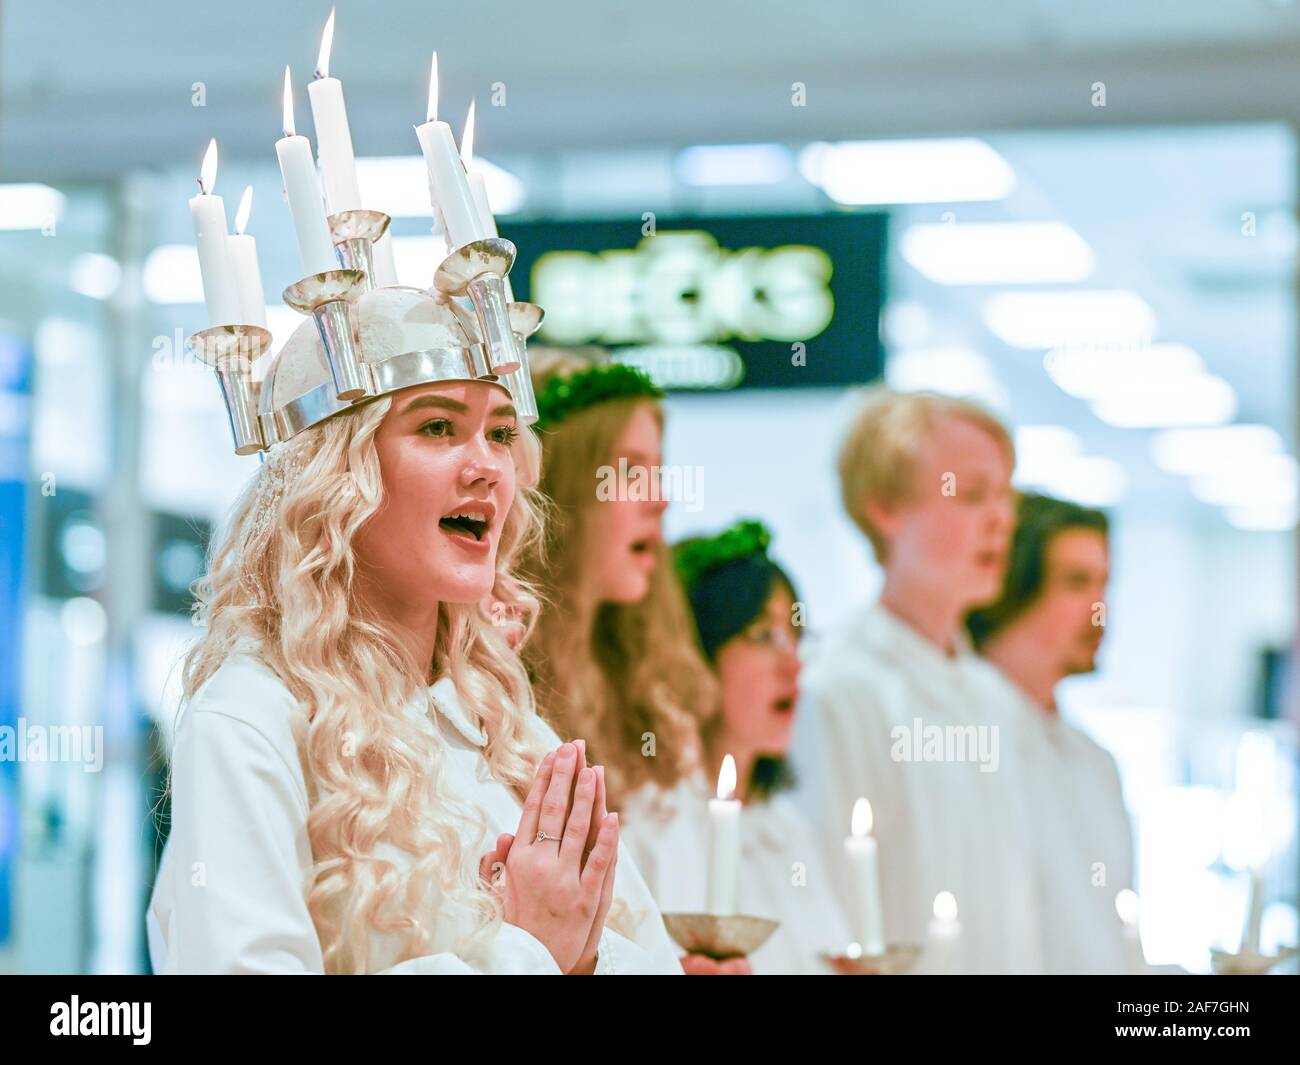 Traditional celebration of Saint Lucy in Sweden. Norrkoping’s Lucia 2019 Izabella Swartz singing carols in shopping mall Linden. Stock Photo